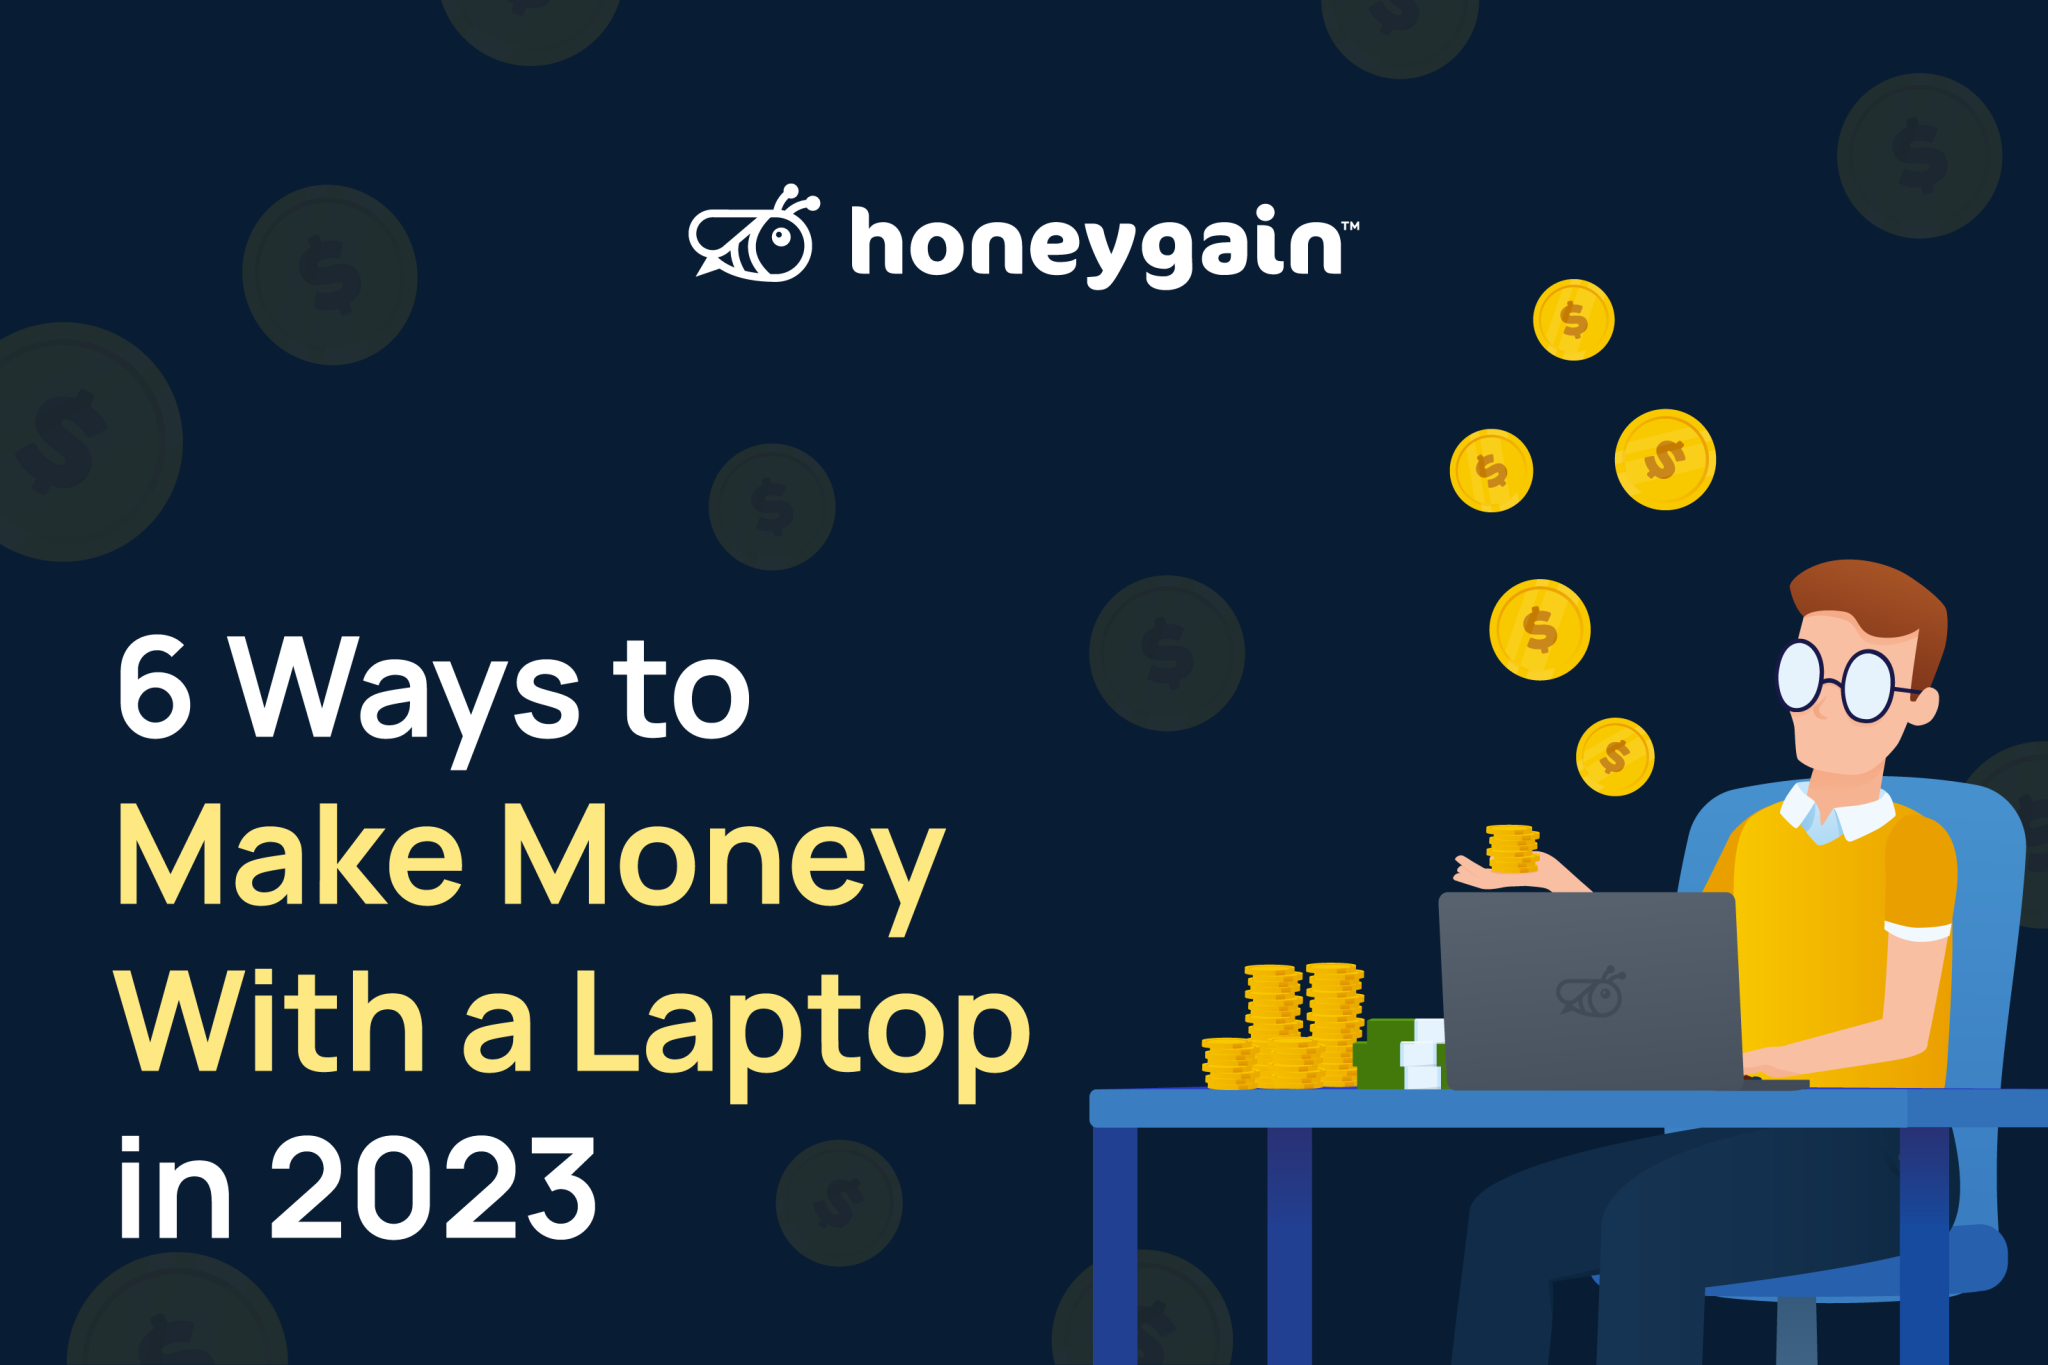 6 Ways to Make Money With a Laptop in 2023